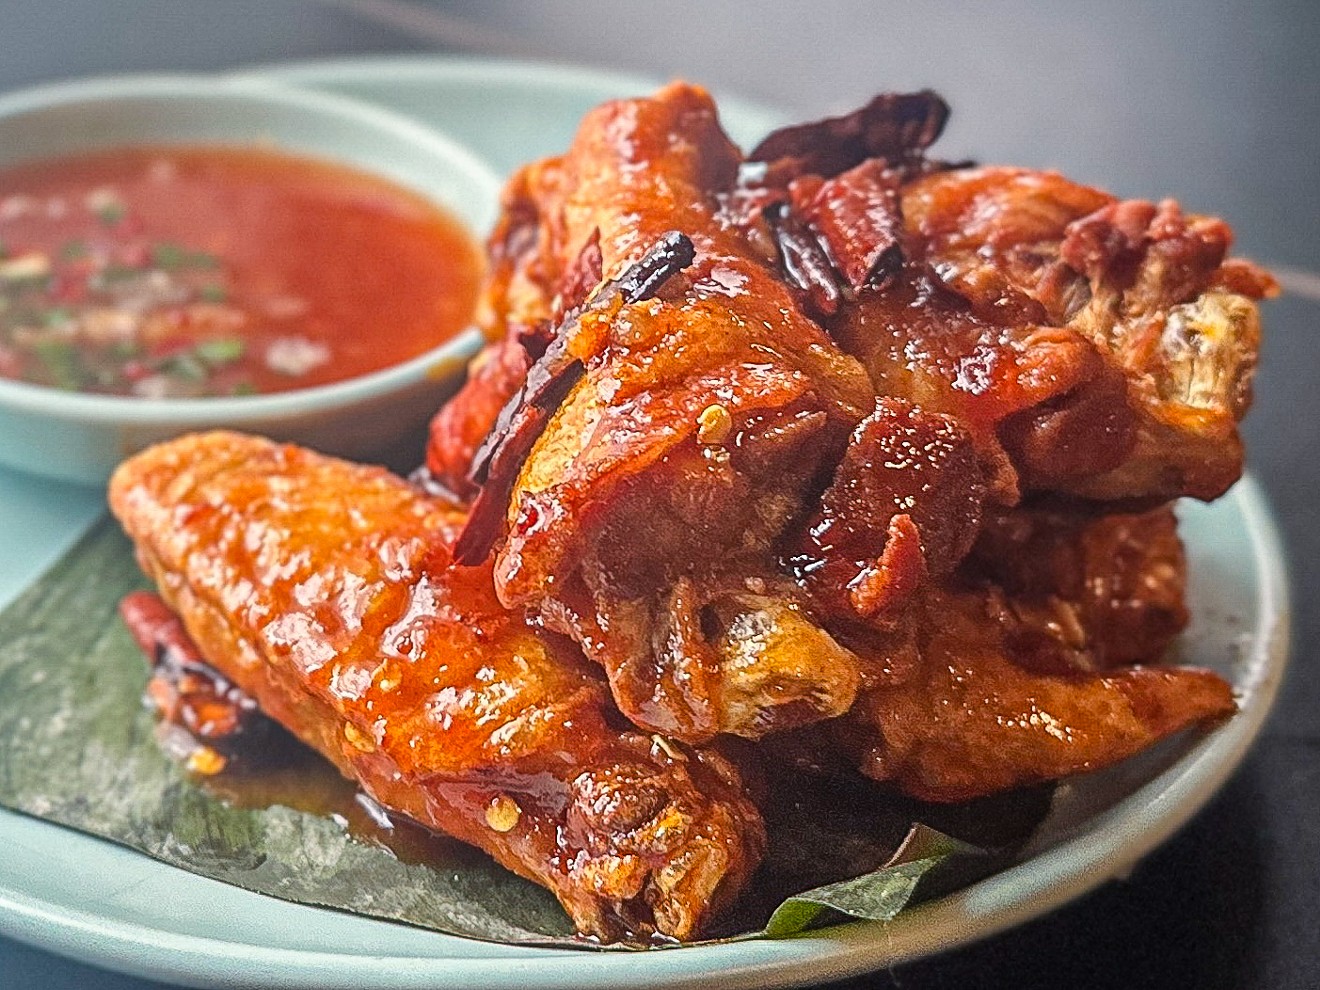 Tom yum chicken wings are a tasty option that doesn't need the accompanying sauce.